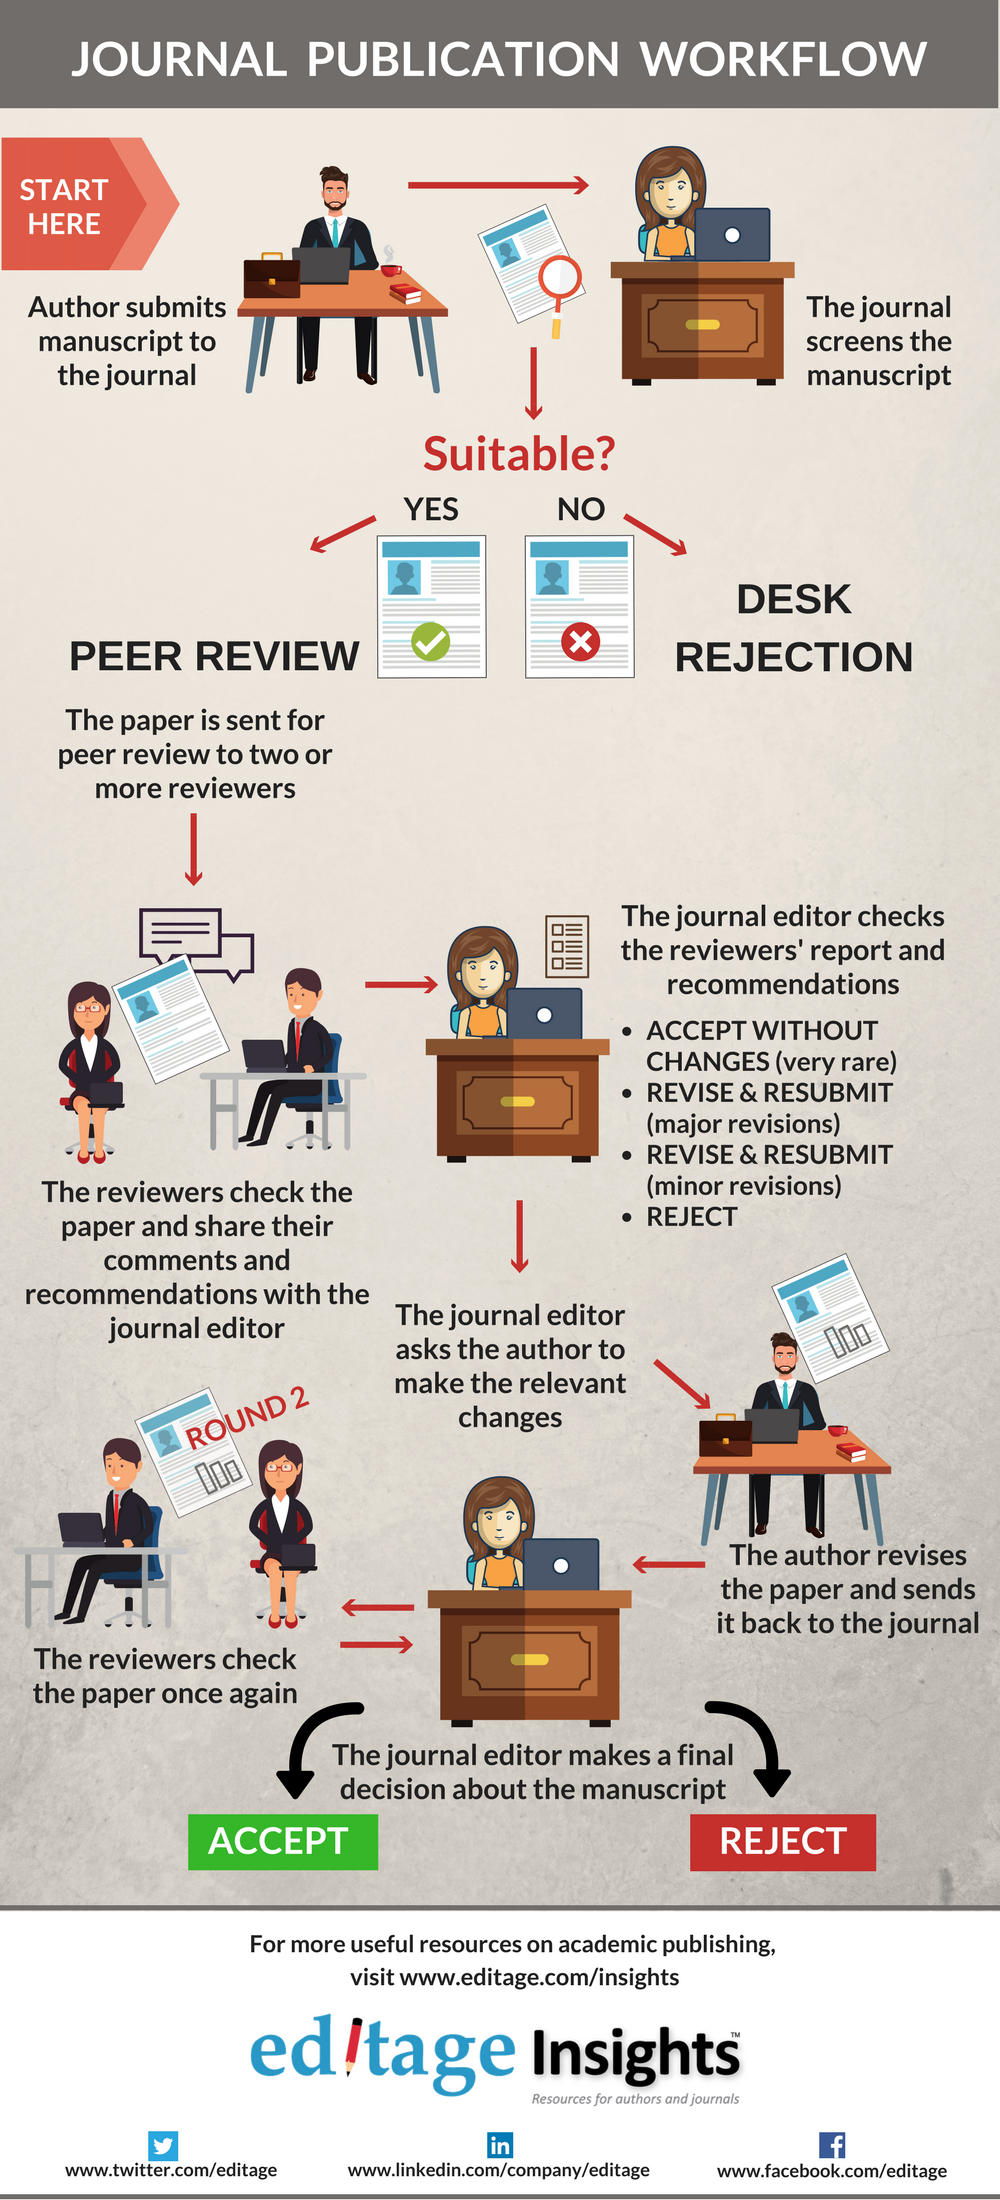 Journal Publication Workflow infographic